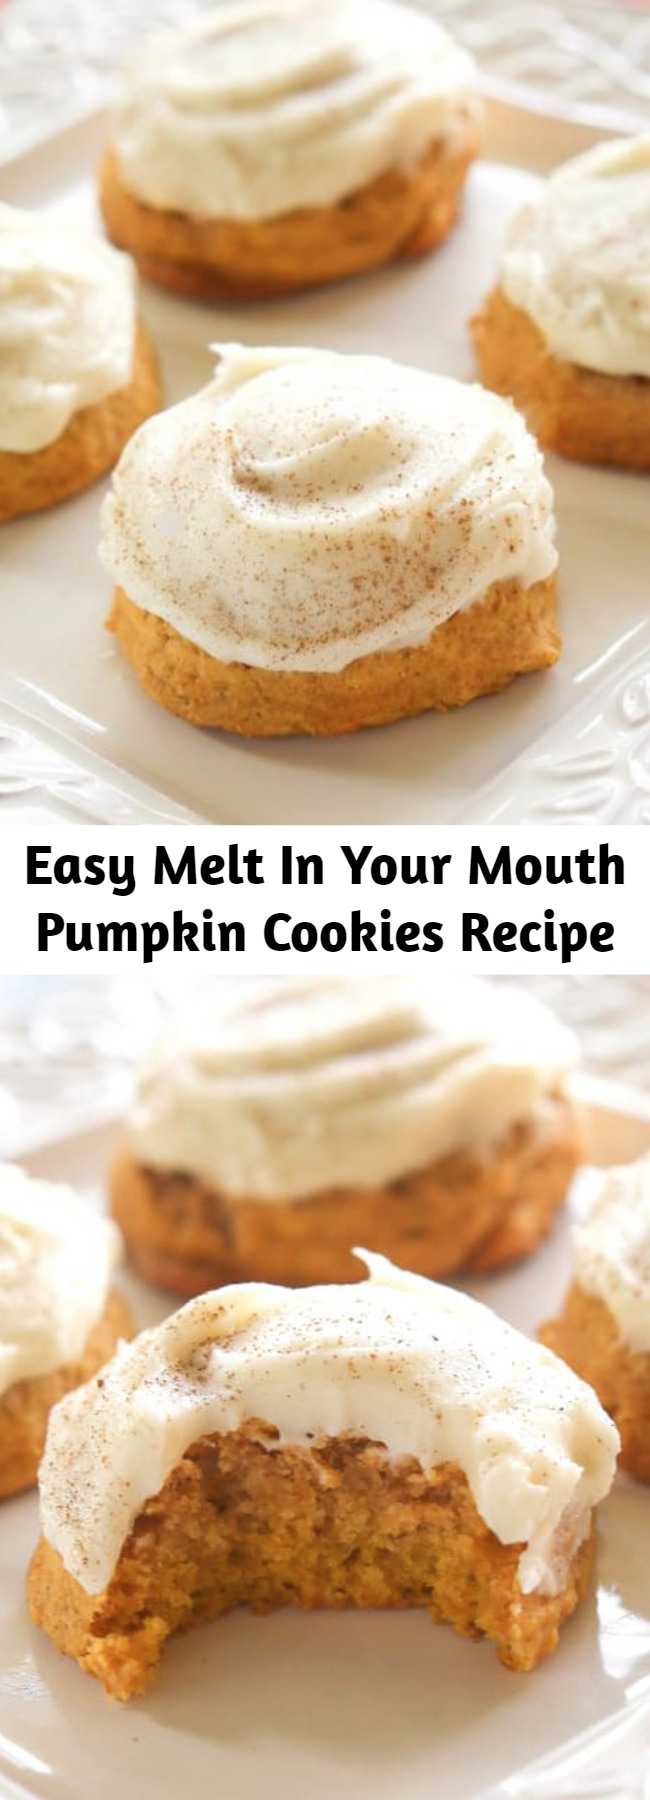 Easy Melt In Your Mouth Pumpkin Cookies Recipe - Melt In Your Mouth Pumpkin Cookies are incredibly soft and well,…melt-in-your-mouth! These cookies have a mild pumpkin flavor and are topped with a decadent cream cheese frosting. The perfect fall dessert. #pumpkin #cookies #comfortfood